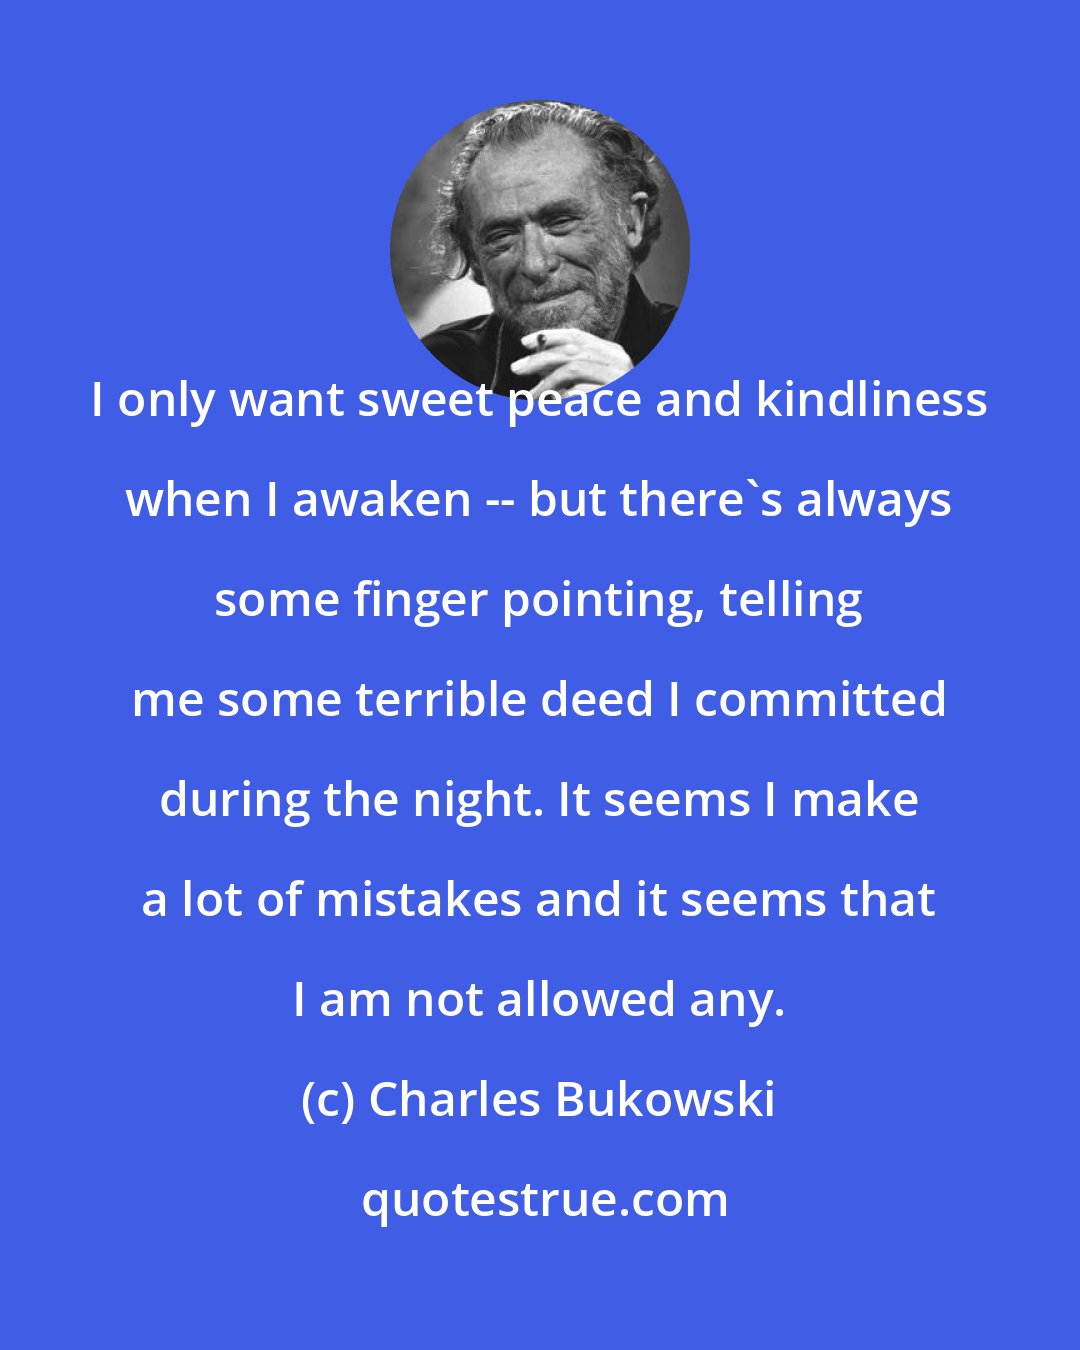 Charles Bukowski: I only want sweet peace and kindliness when I awaken -- but there's always some finger pointing, telling me some terrible deed I committed during the night. It seems I make a lot of mistakes and it seems that I am not allowed any.